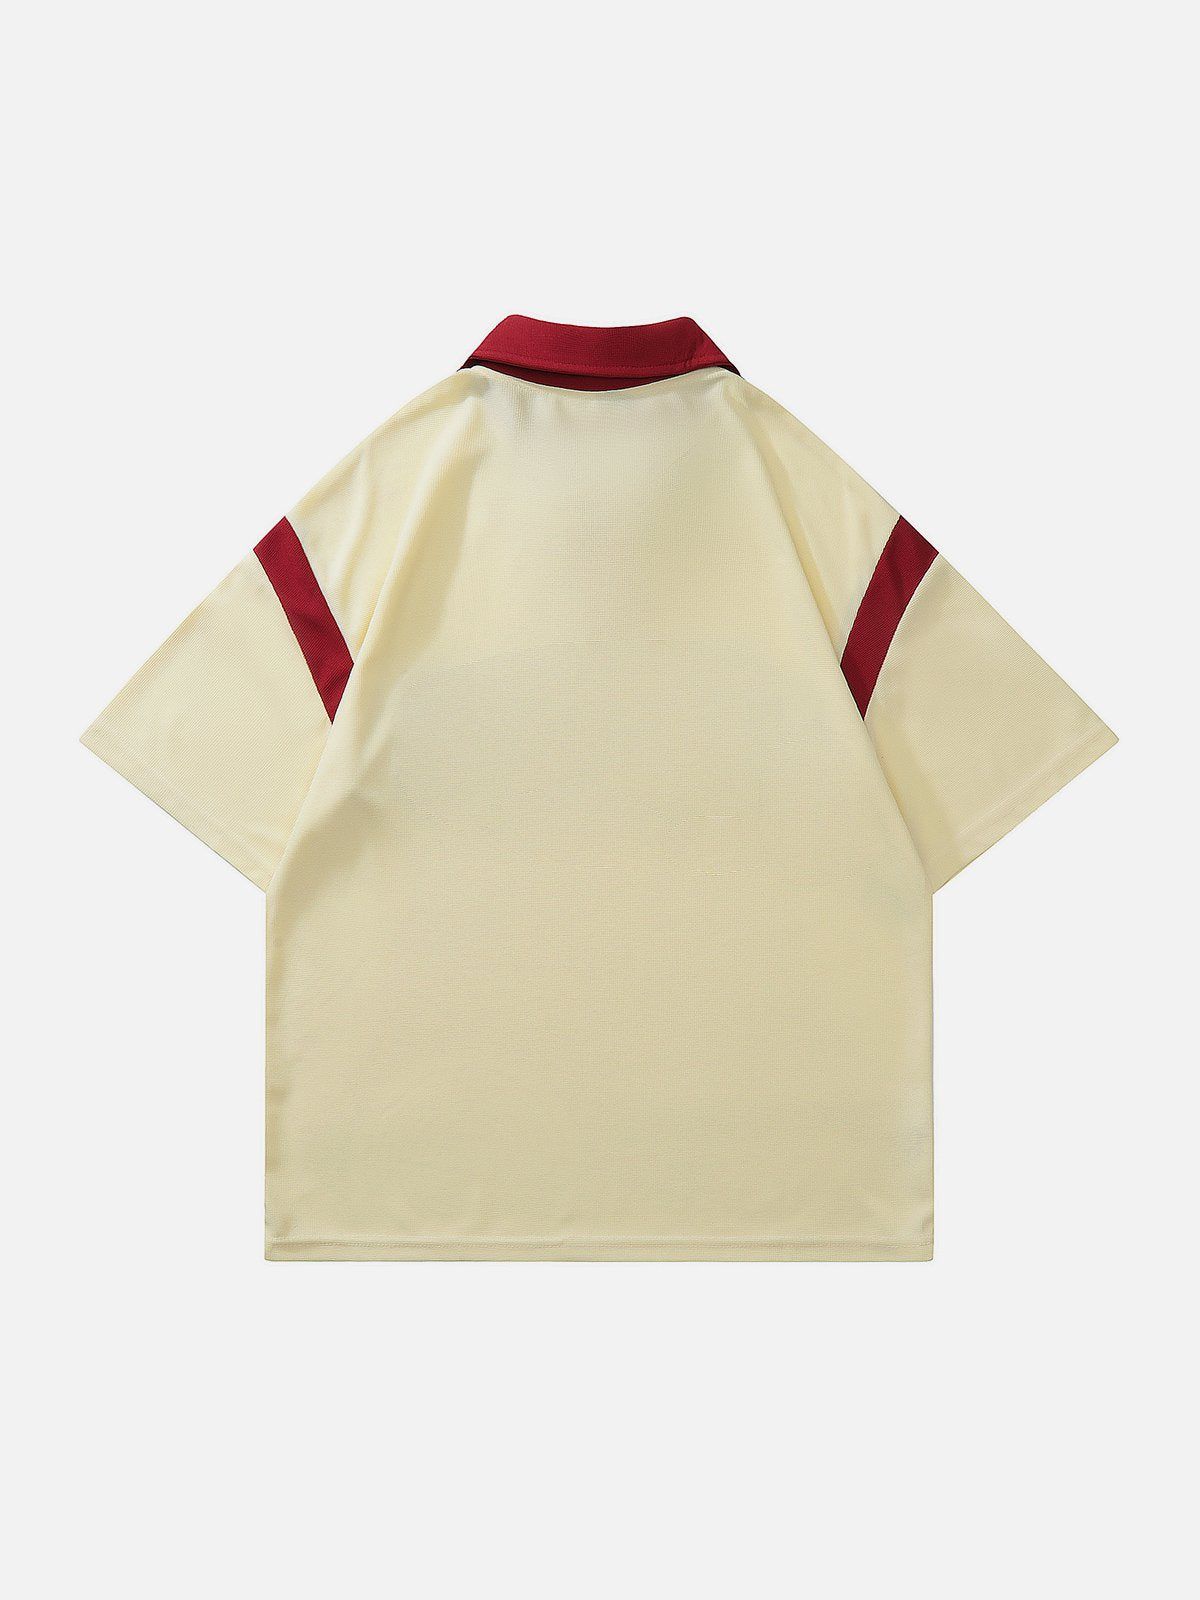 Sneakerland™ - Letter Embroidery Polo Tee